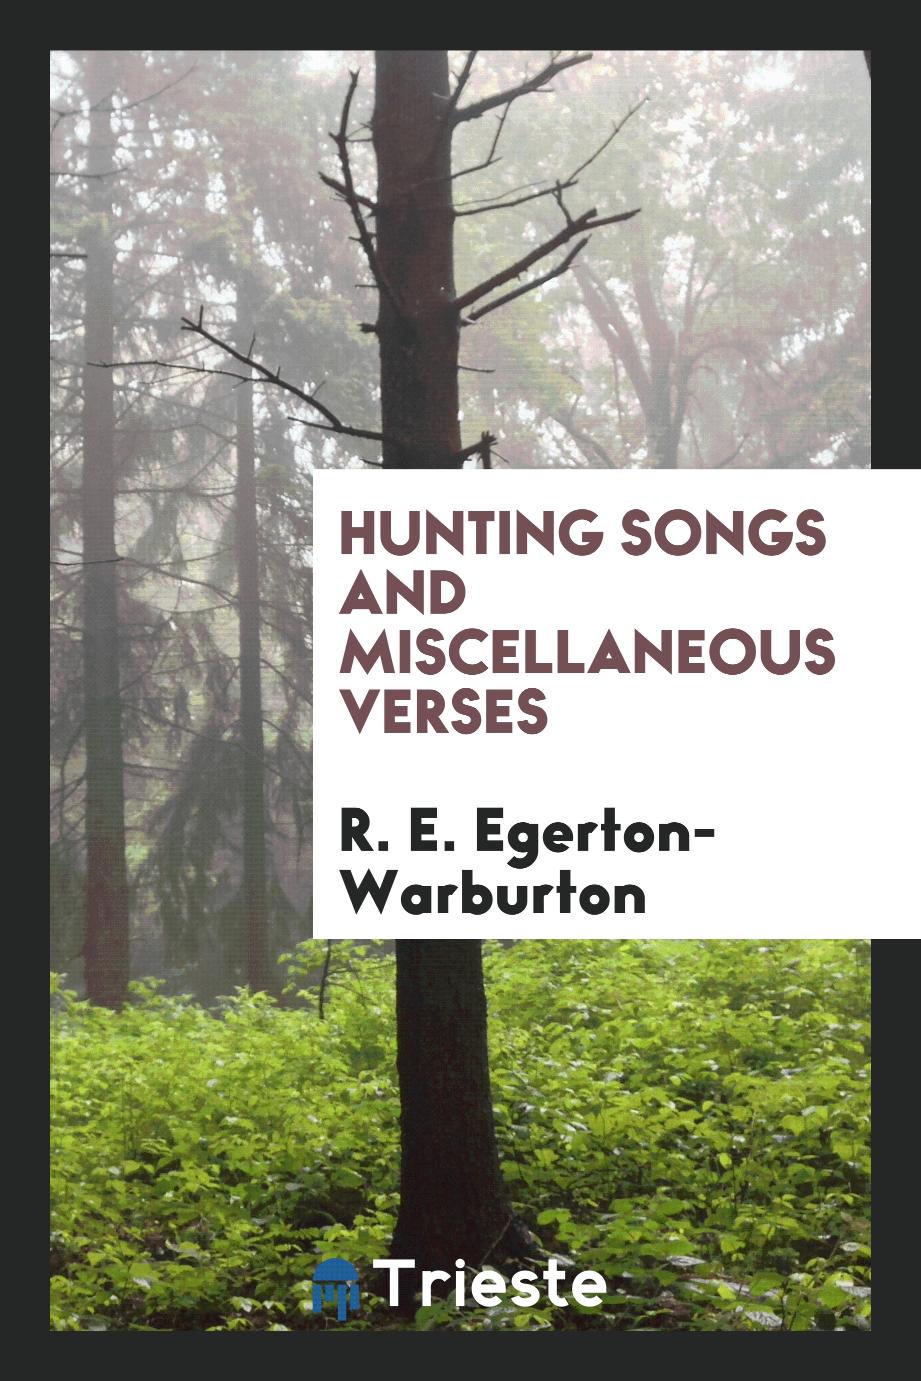 Hunting songs and miscellaneous verses